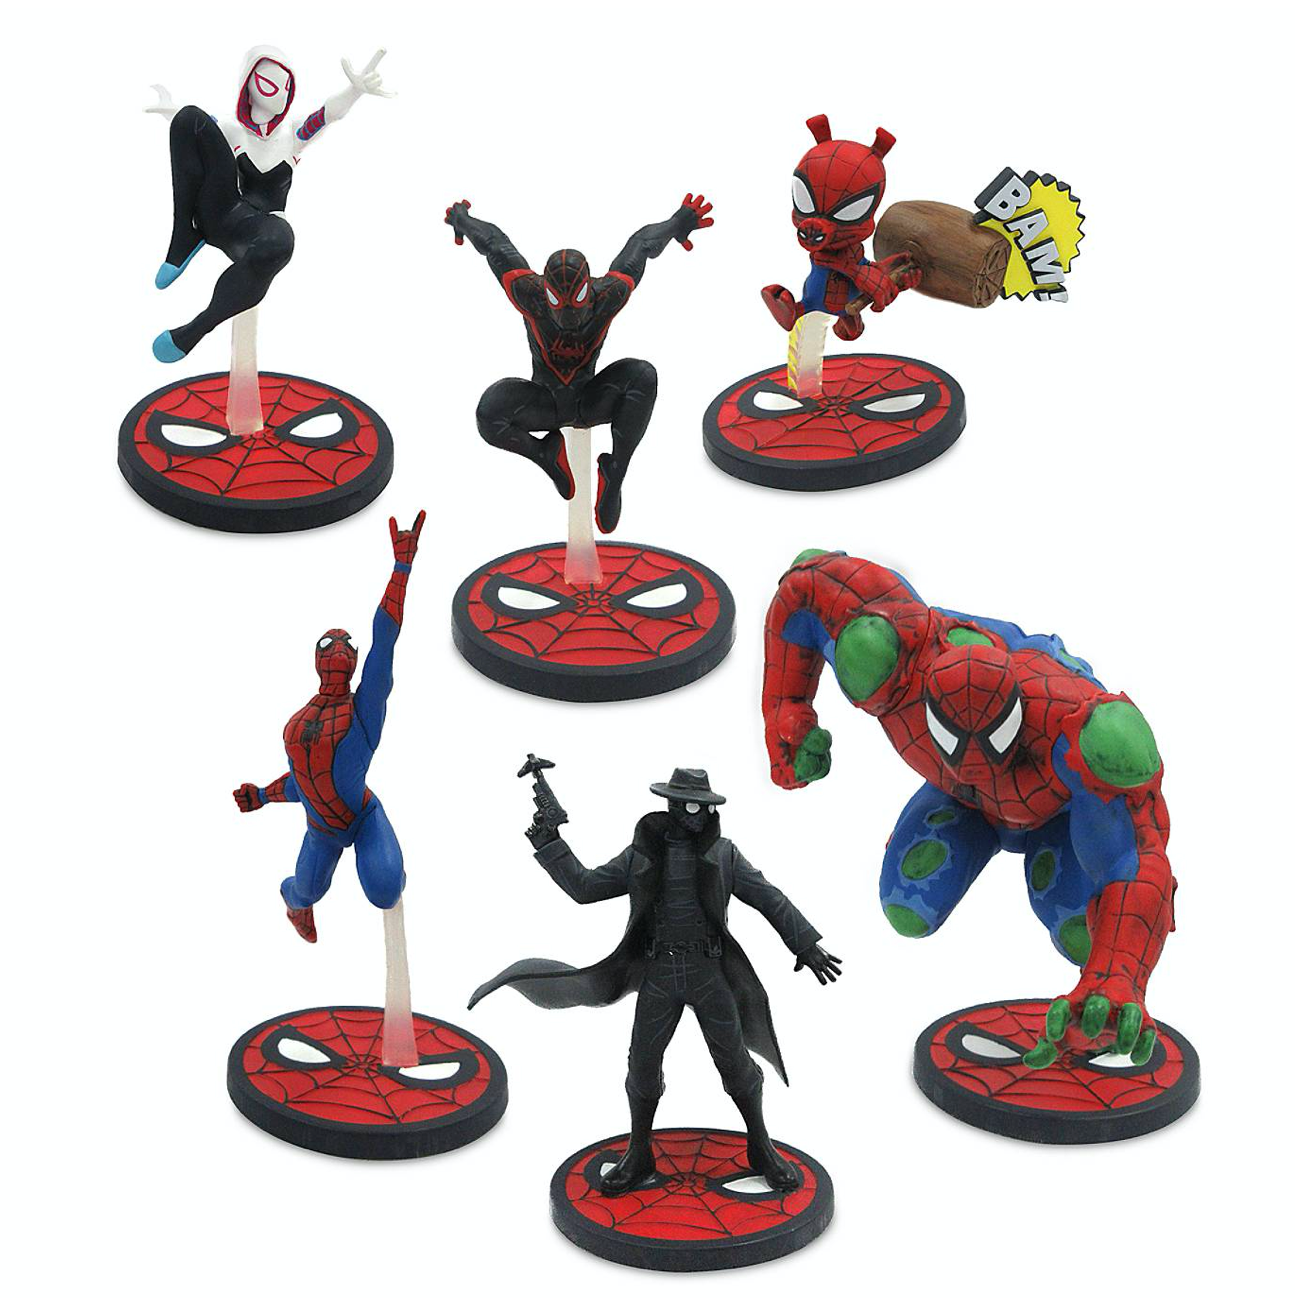 Disney Spider-Man Figure Play Set Cake Topper New with Box